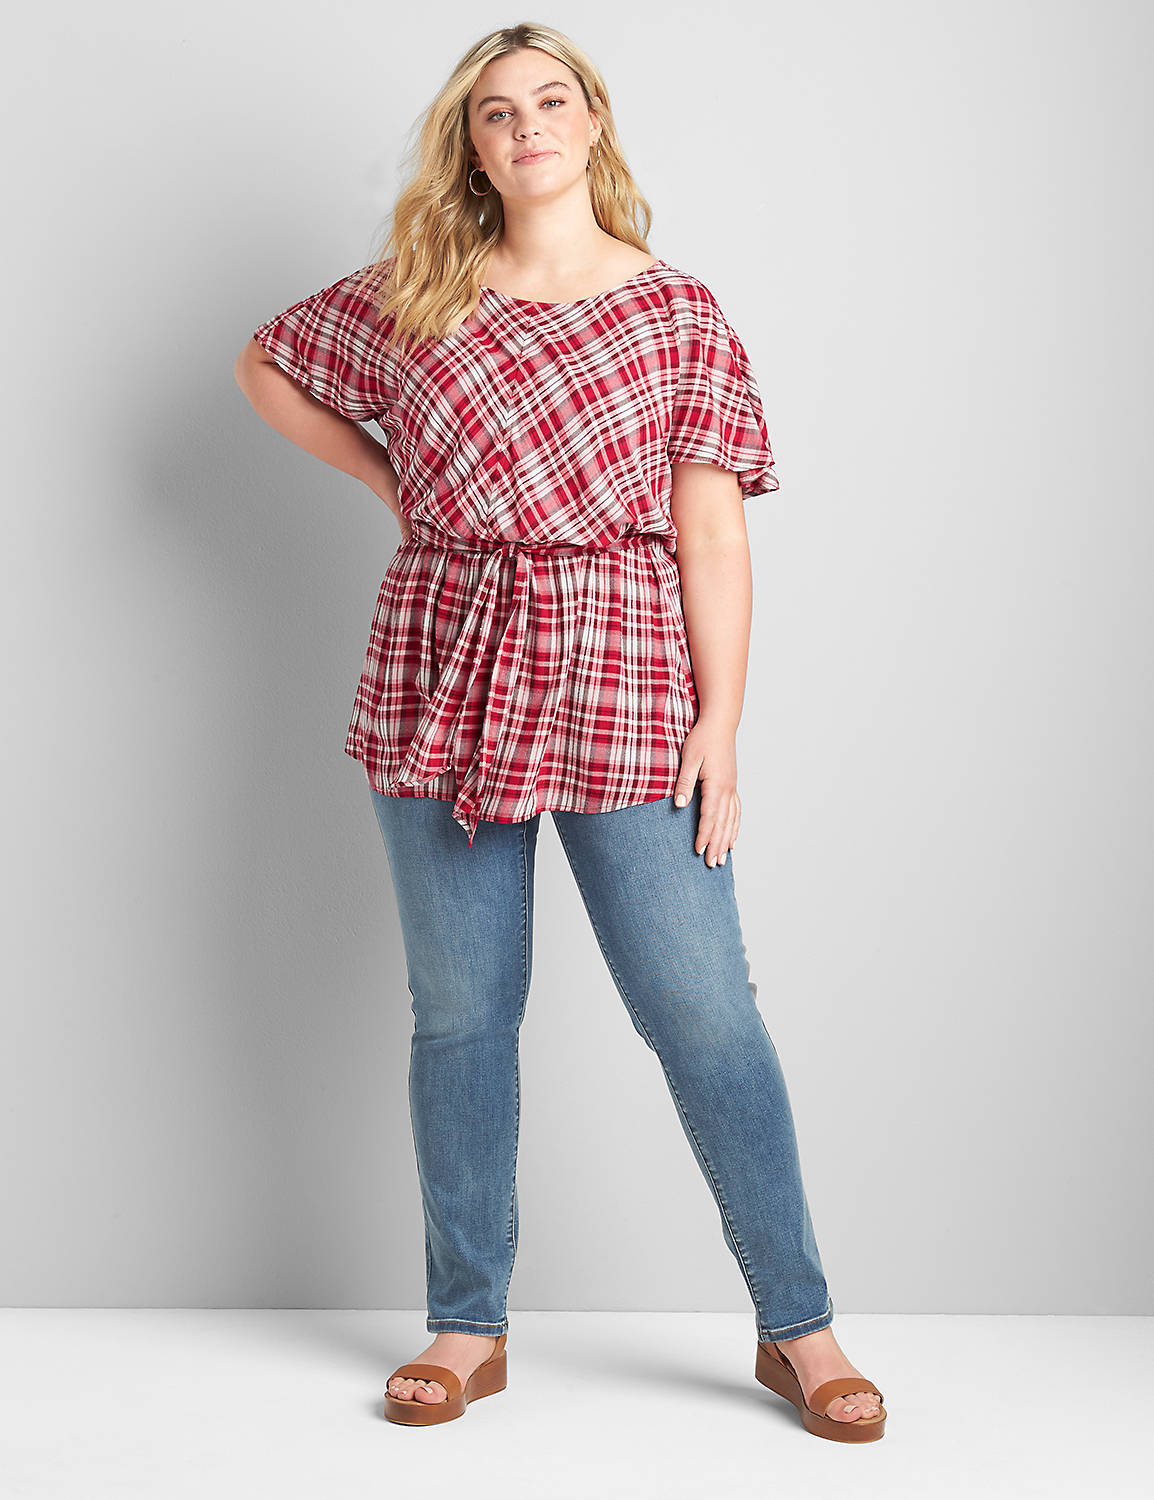 Short-Sleeve Belted Plaid Top Product Image 3